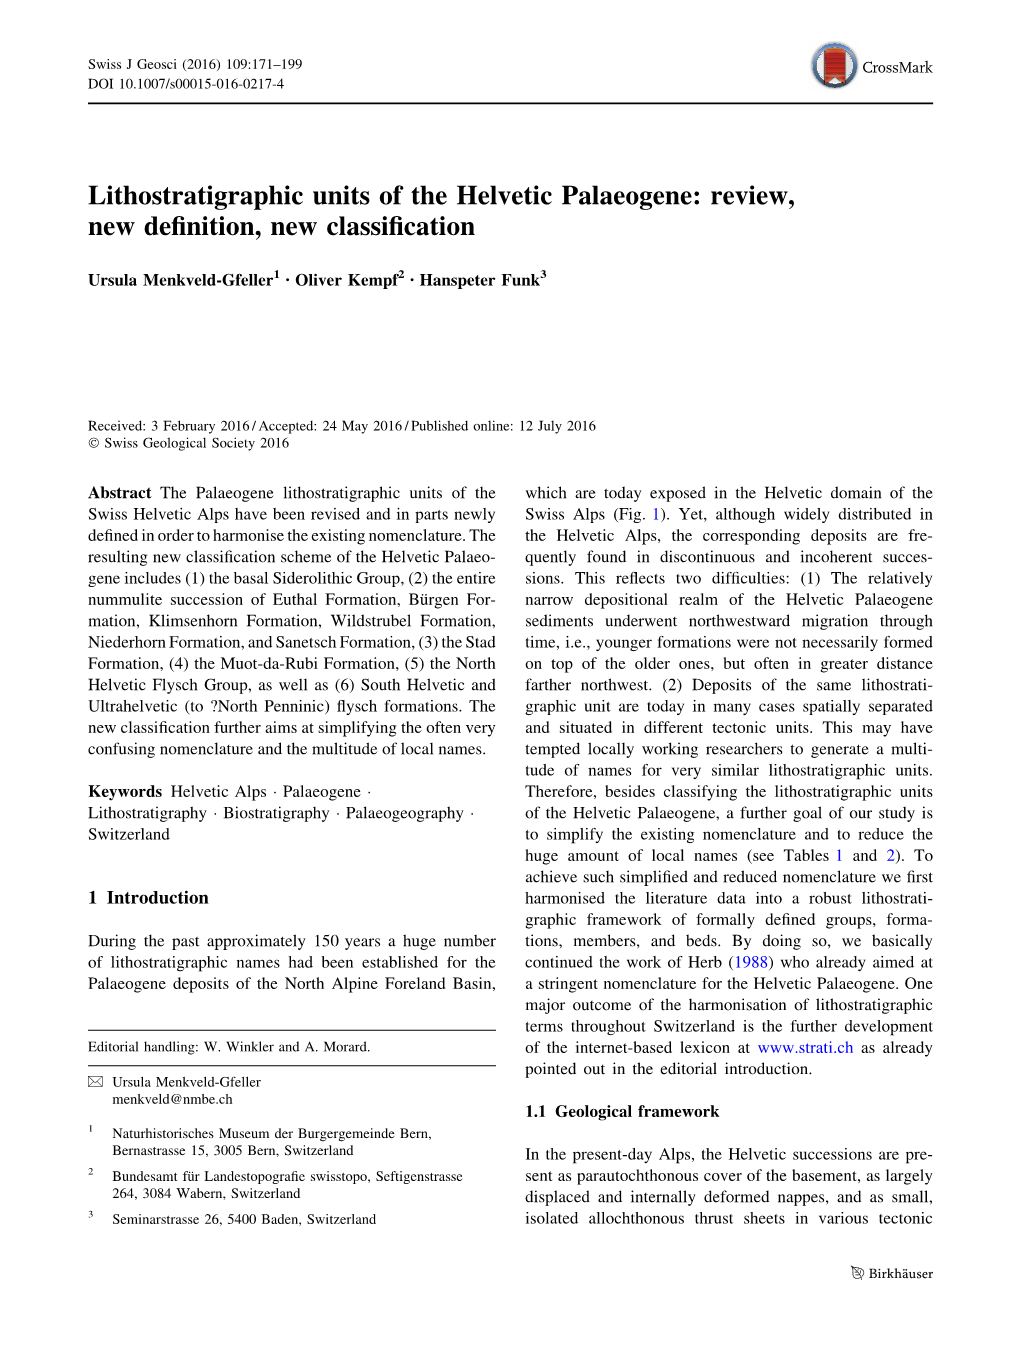 Lithostratigraphic Units of the Helvetic Palaeogene: Review, New Definition